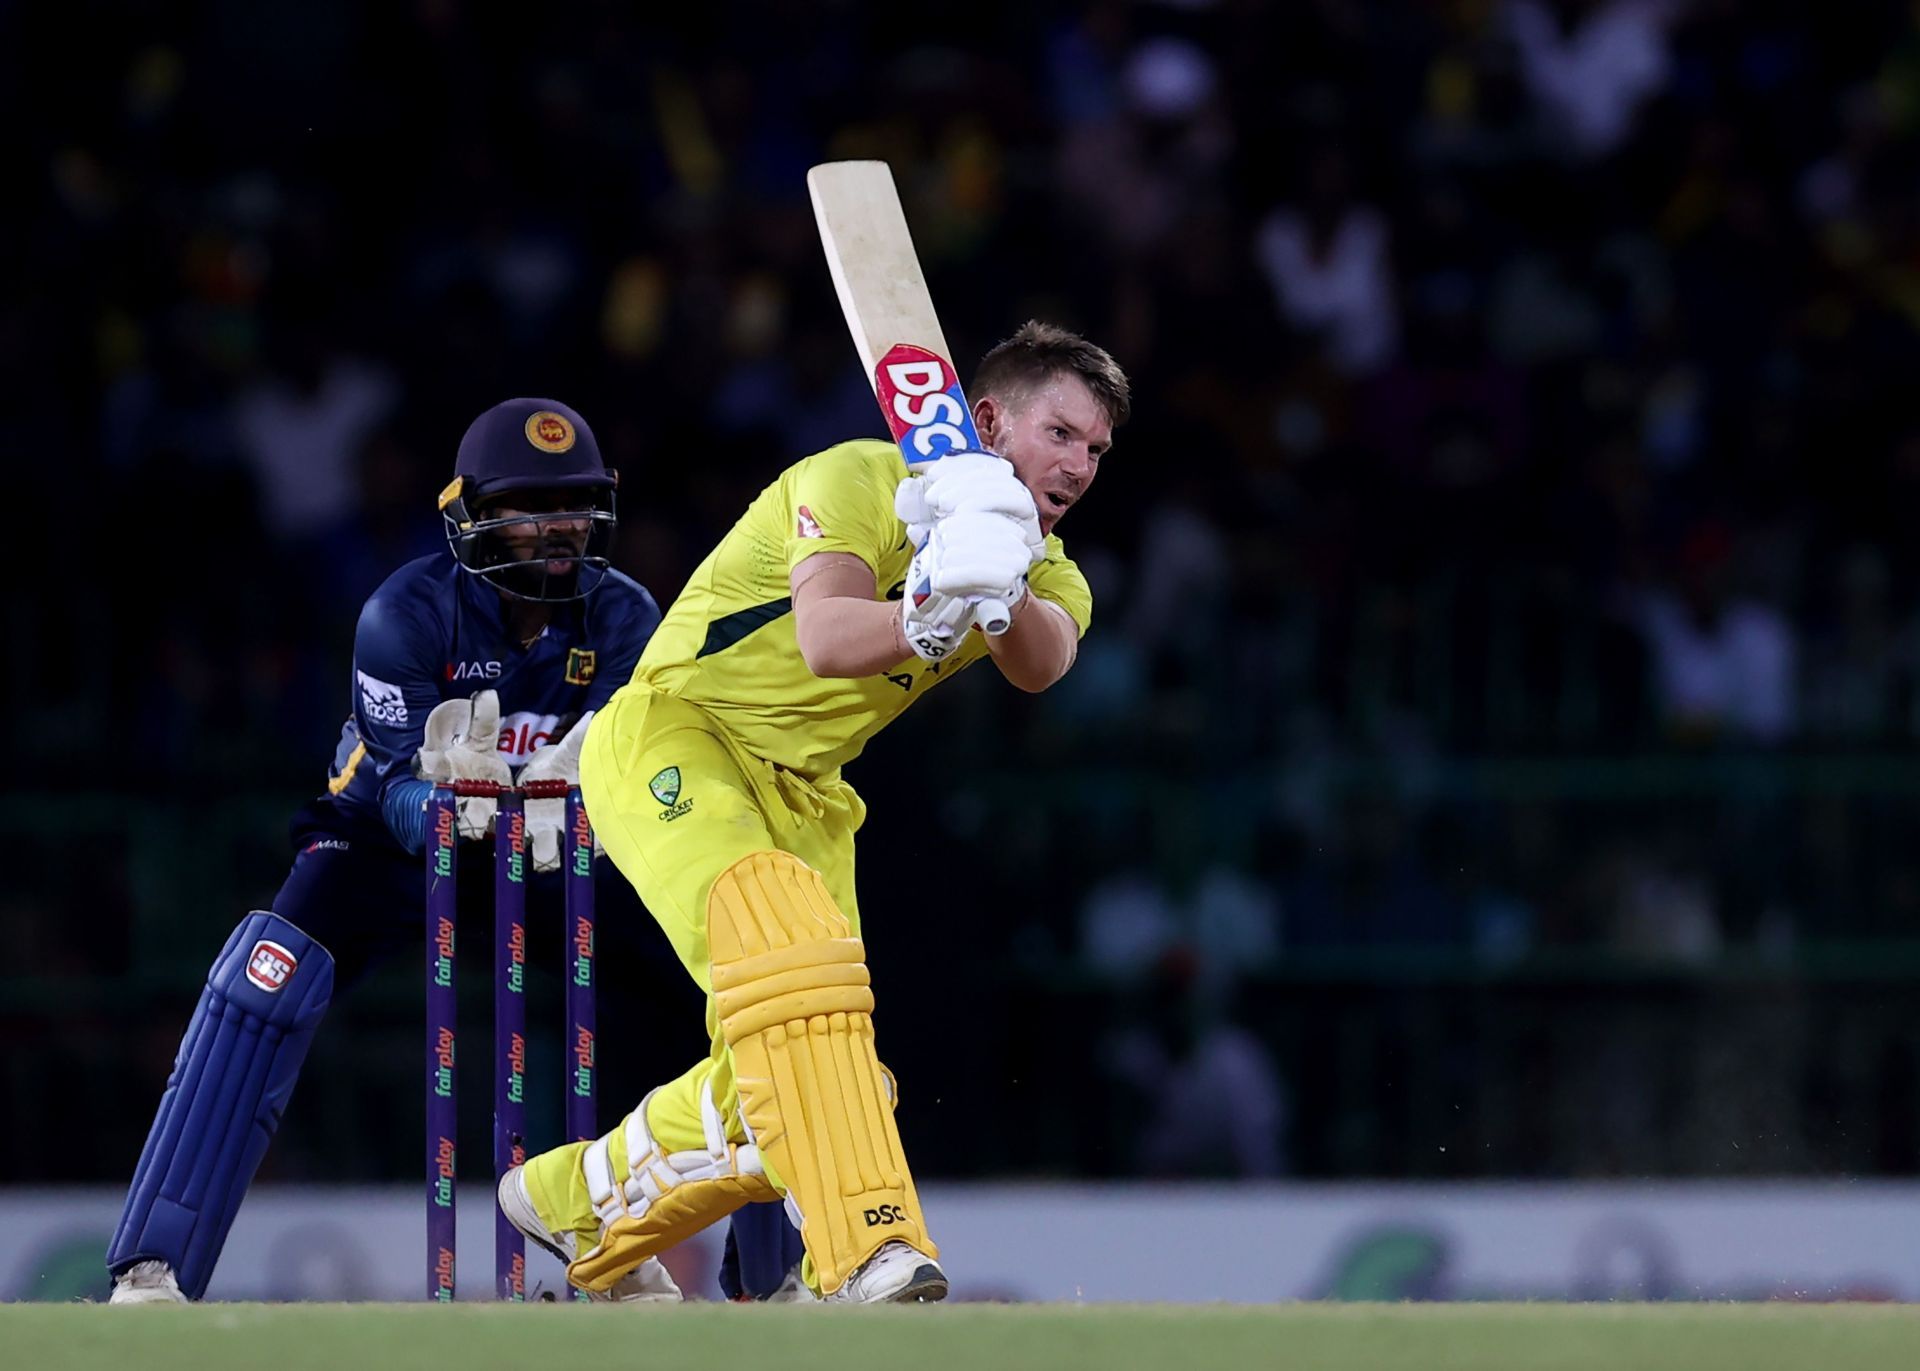 David Warner is a hot prospect among T20 franhises around the world